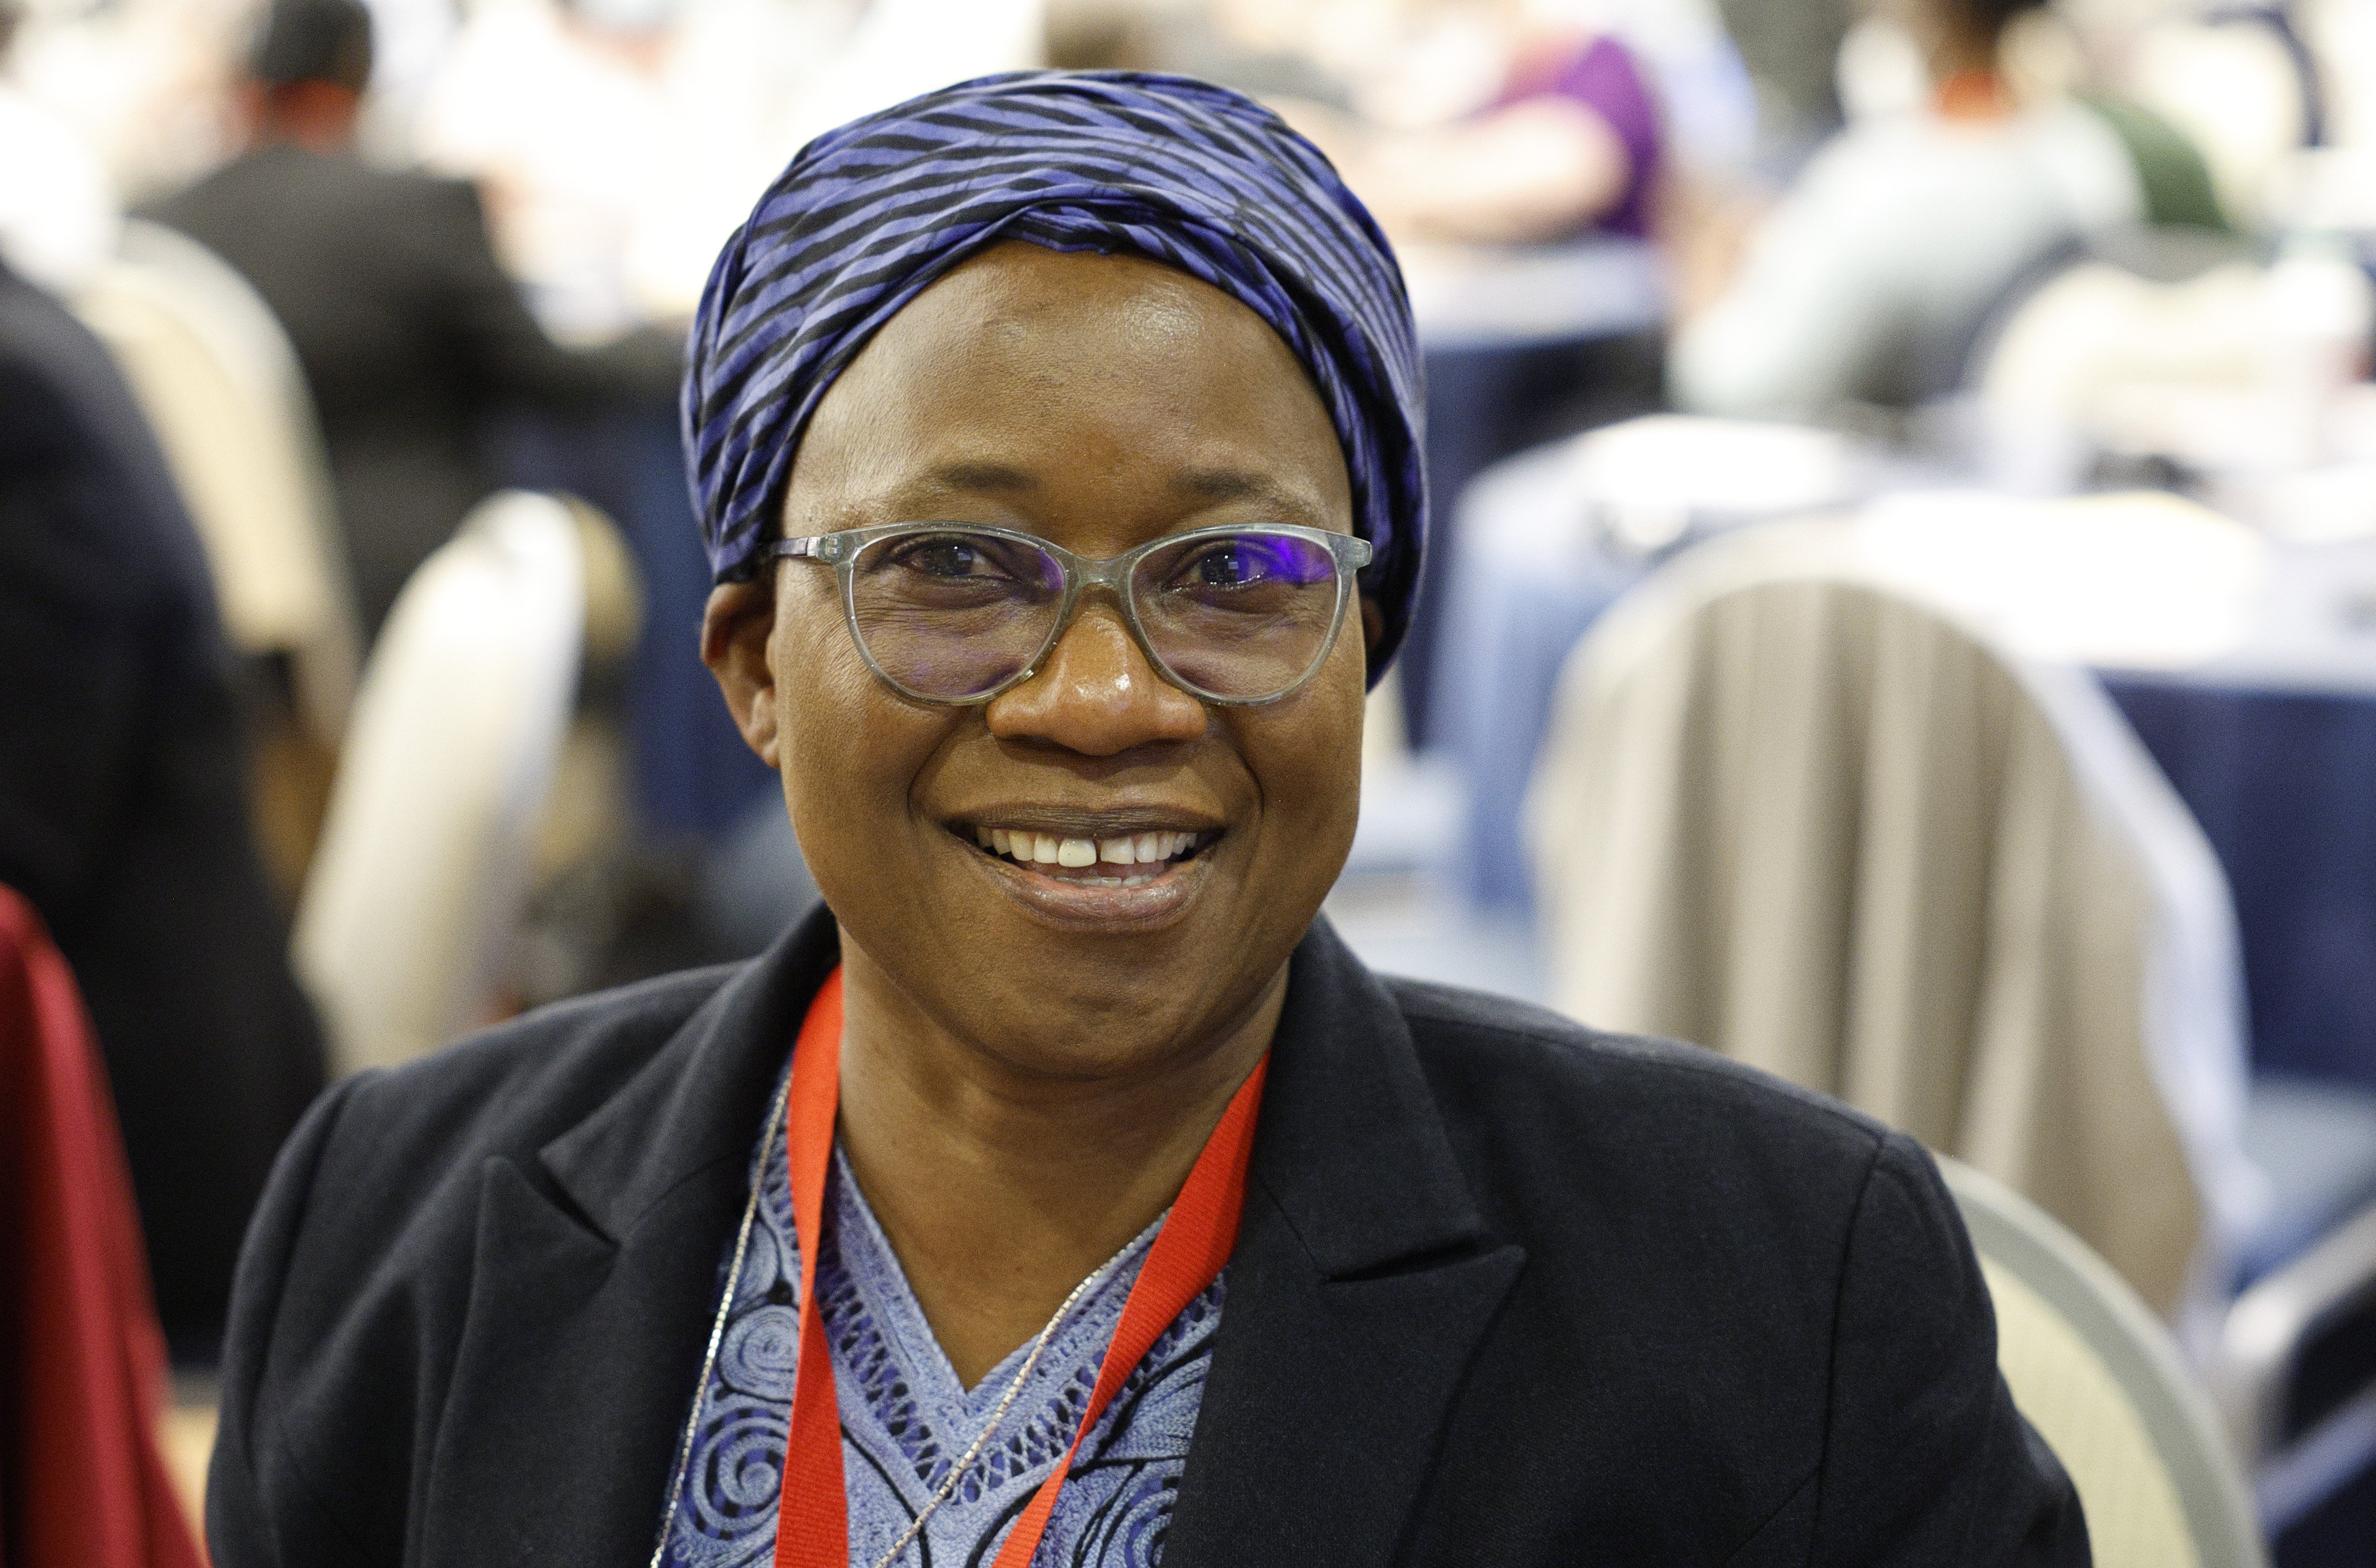 Sr. Anne Falola, a Nigerian member of the Missionaries of Our Lady of the Apostles, poses for a photo May 3 at the plenary assembly of the International Union of Superiors General in Rome. In a speech May 2 to the group, she said when Christians recognize